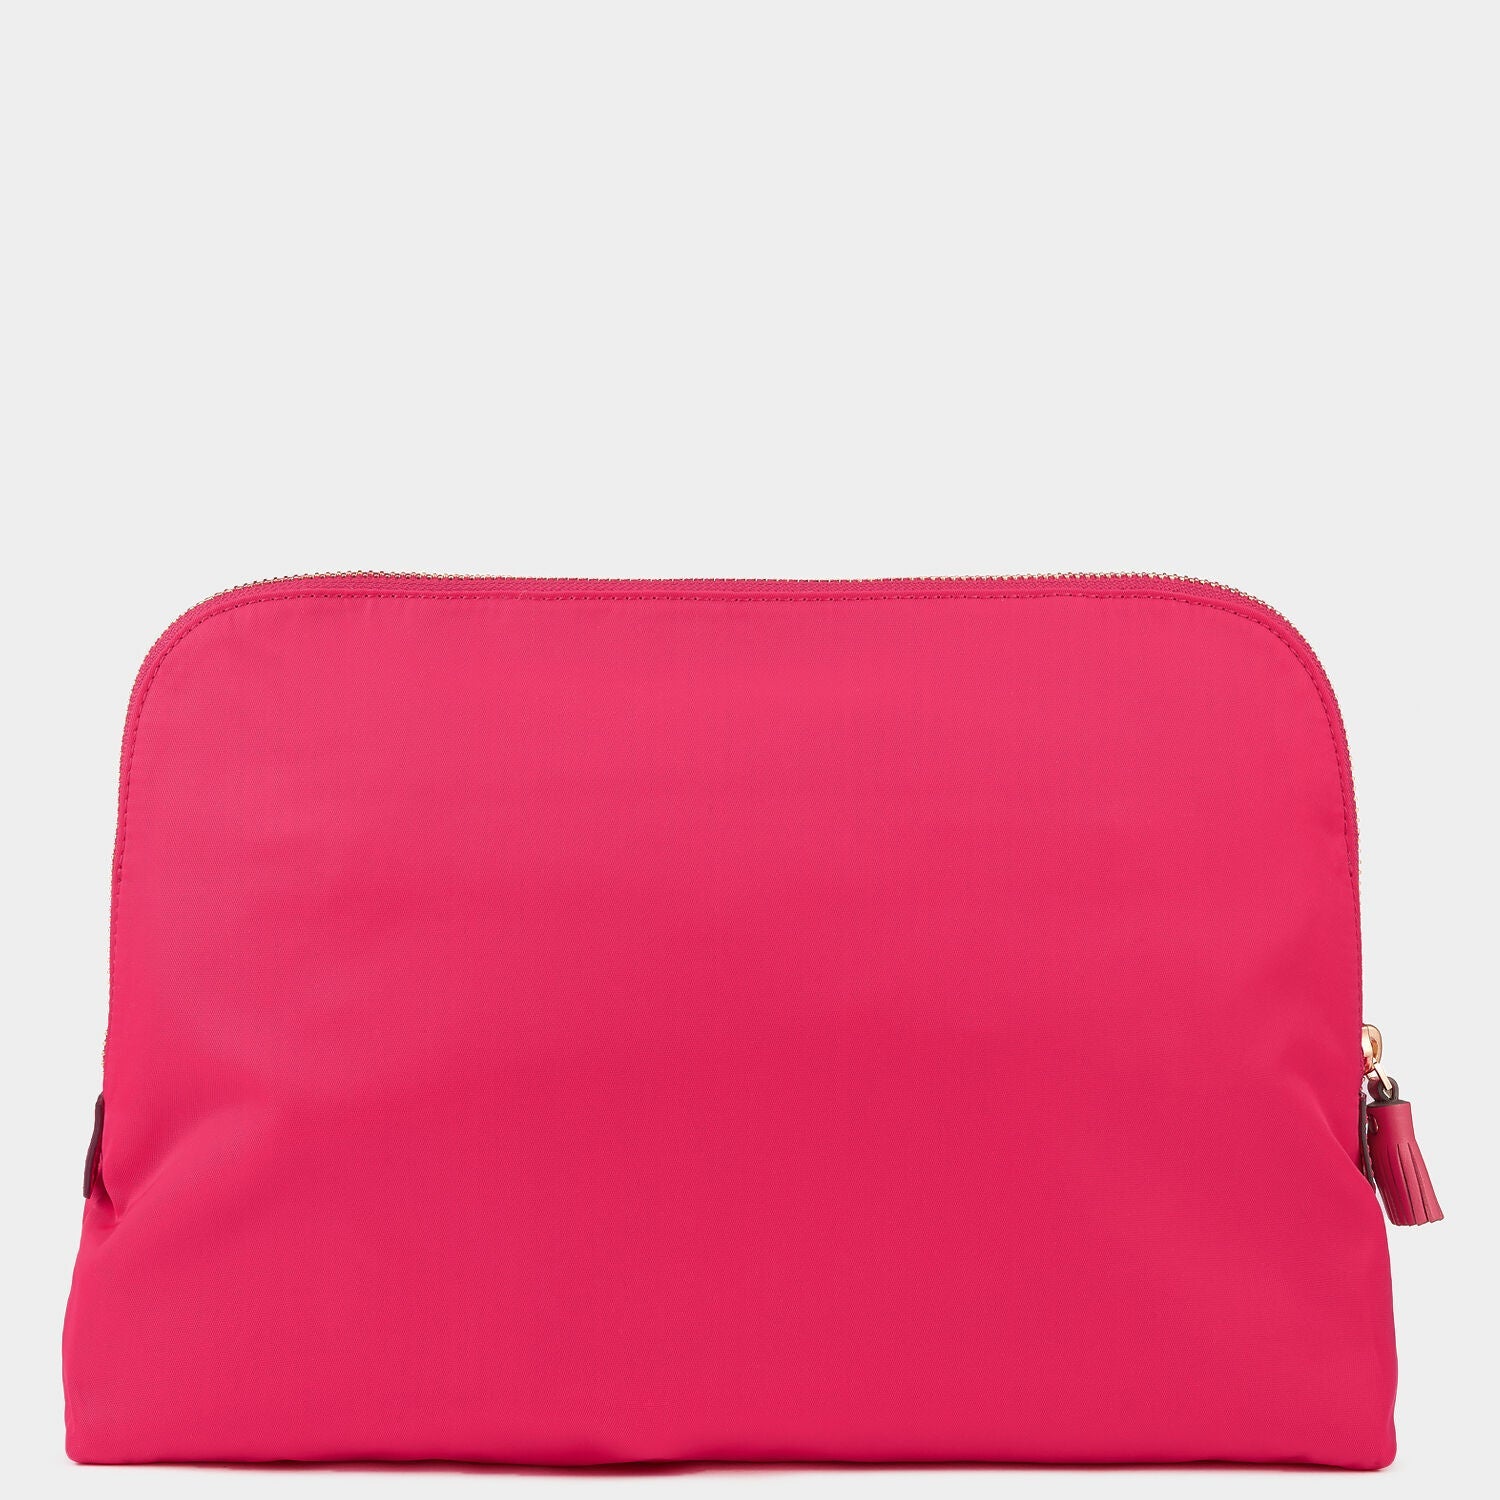 Lotions and Potions Pouch -

                  
                    ECONYL® in Hot Pink -
                  

                  Anya Hindmarch US
